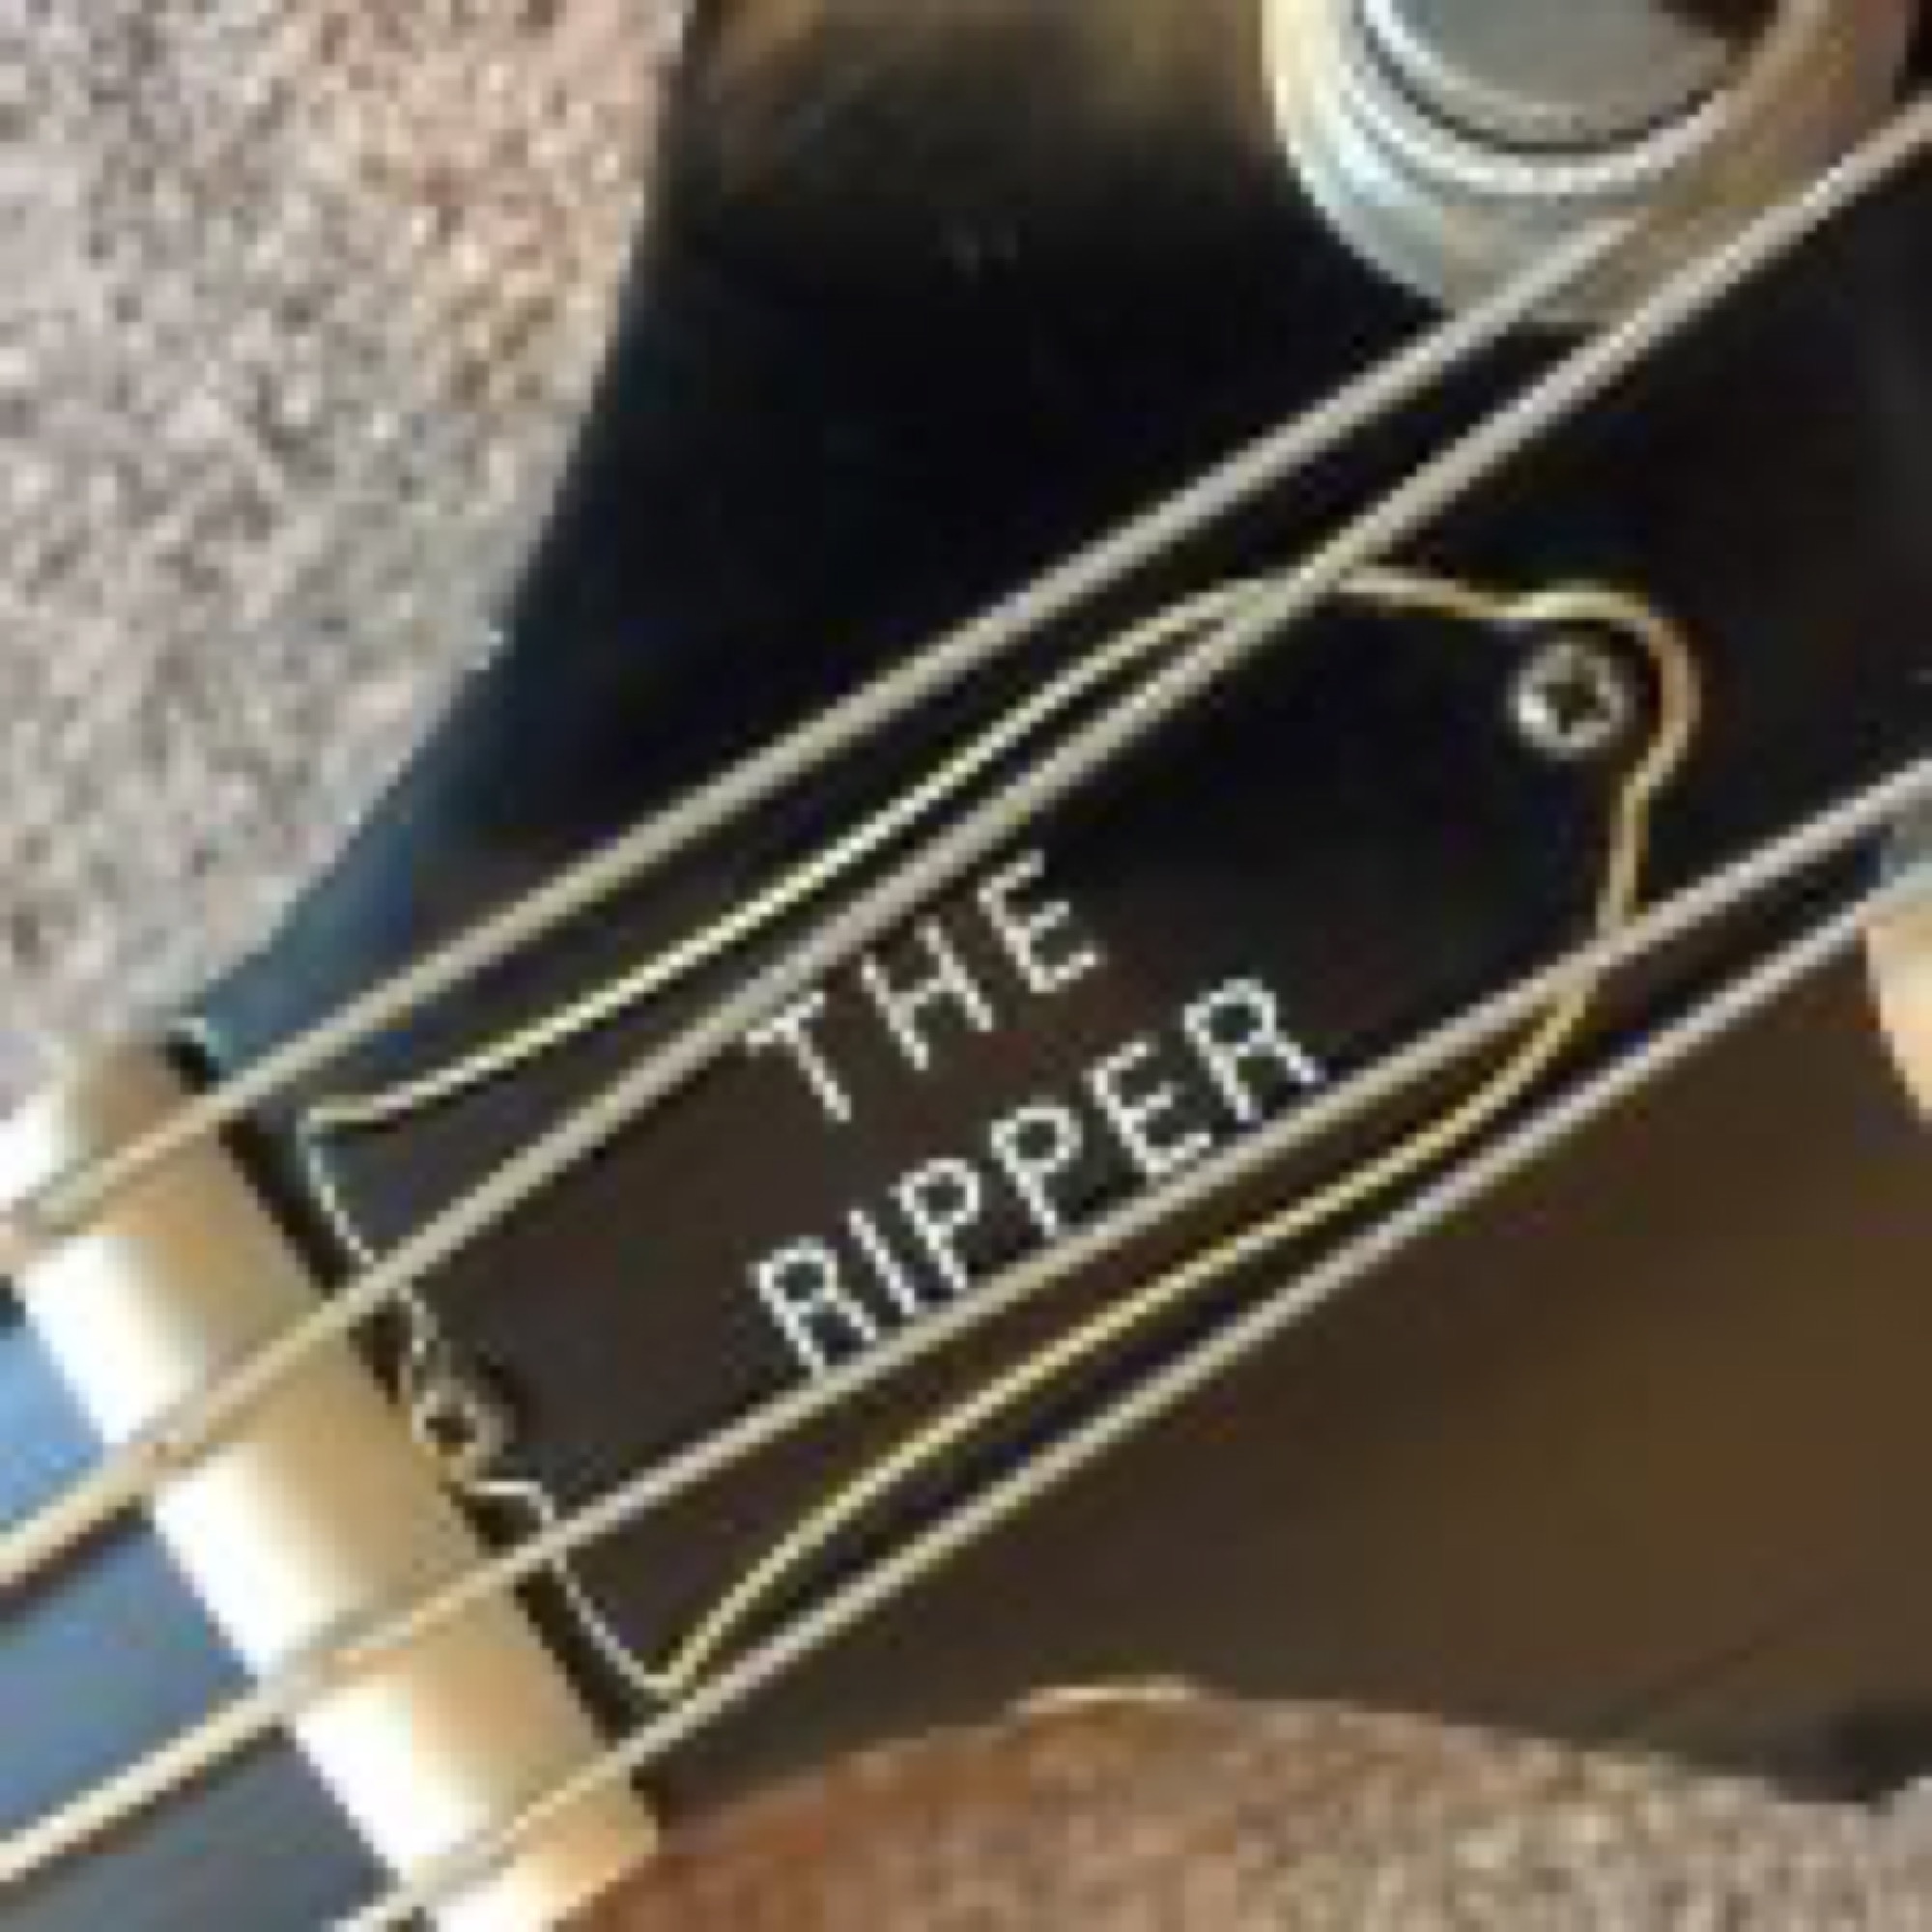 Gibson "The Ripper"